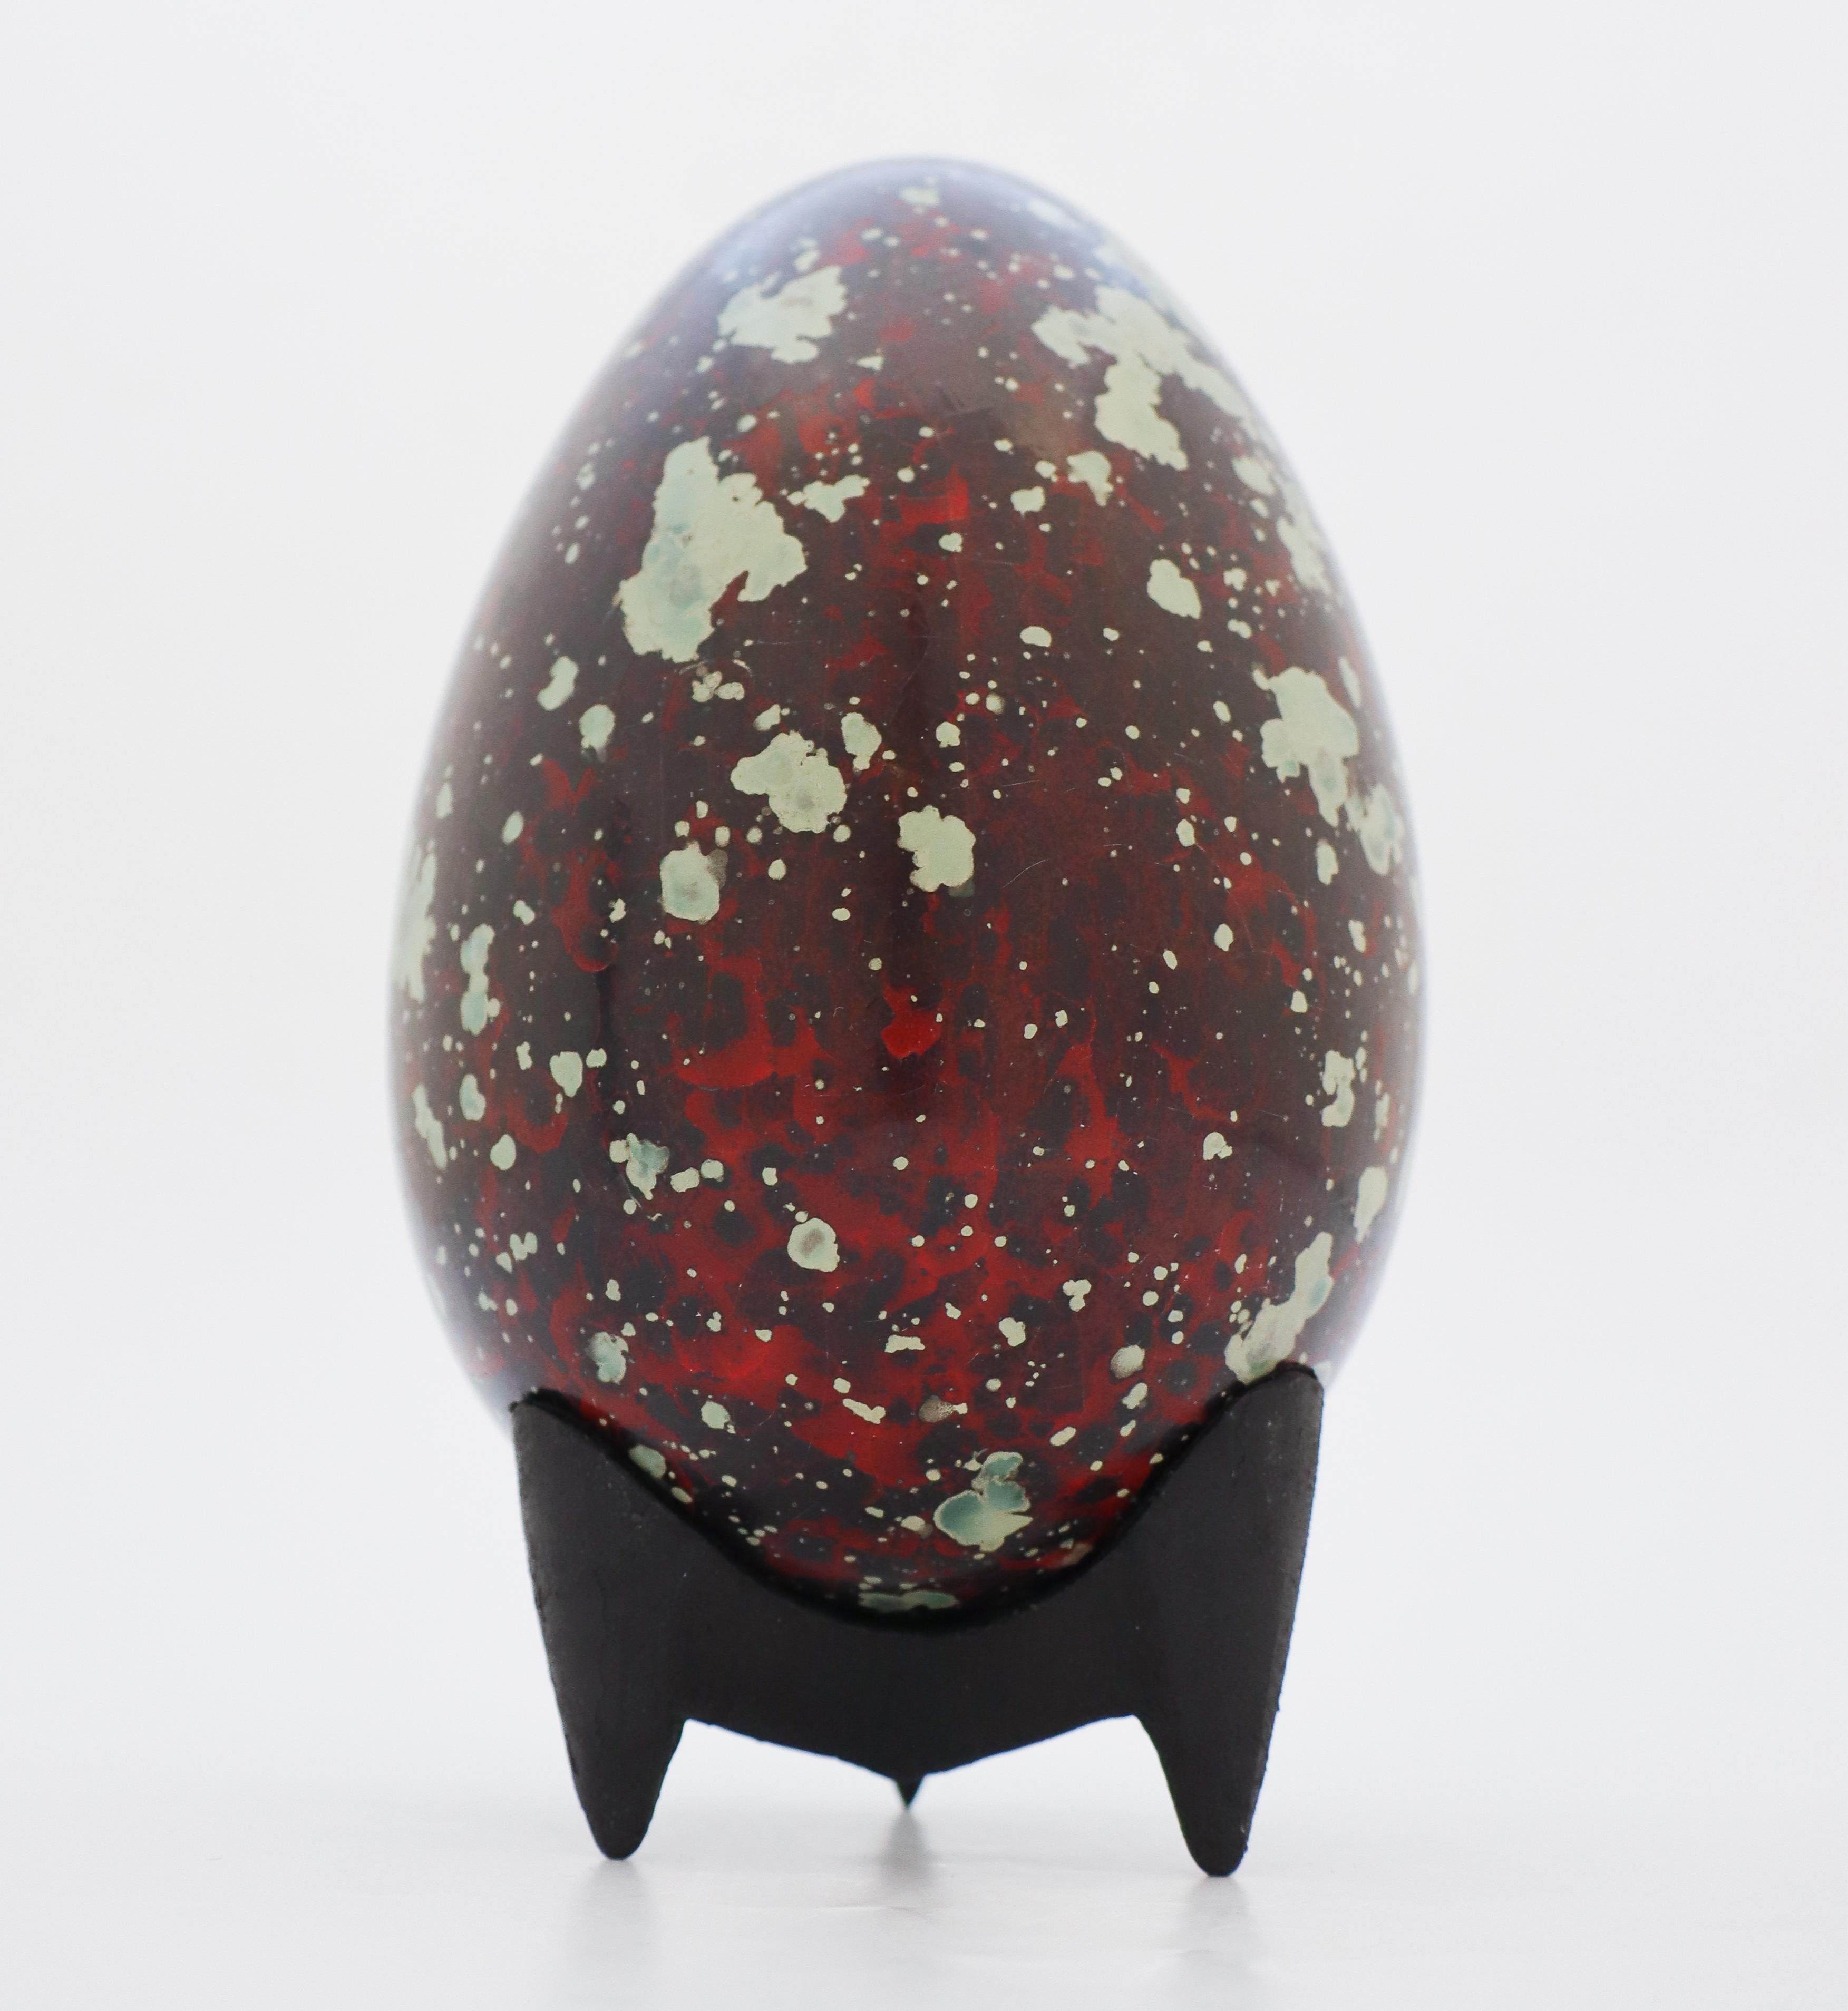 Egg designed by the Swedish ceramicist Hans Hedberg, who lived and worked in Biot, France. This egg is 20,5 cm (8,2